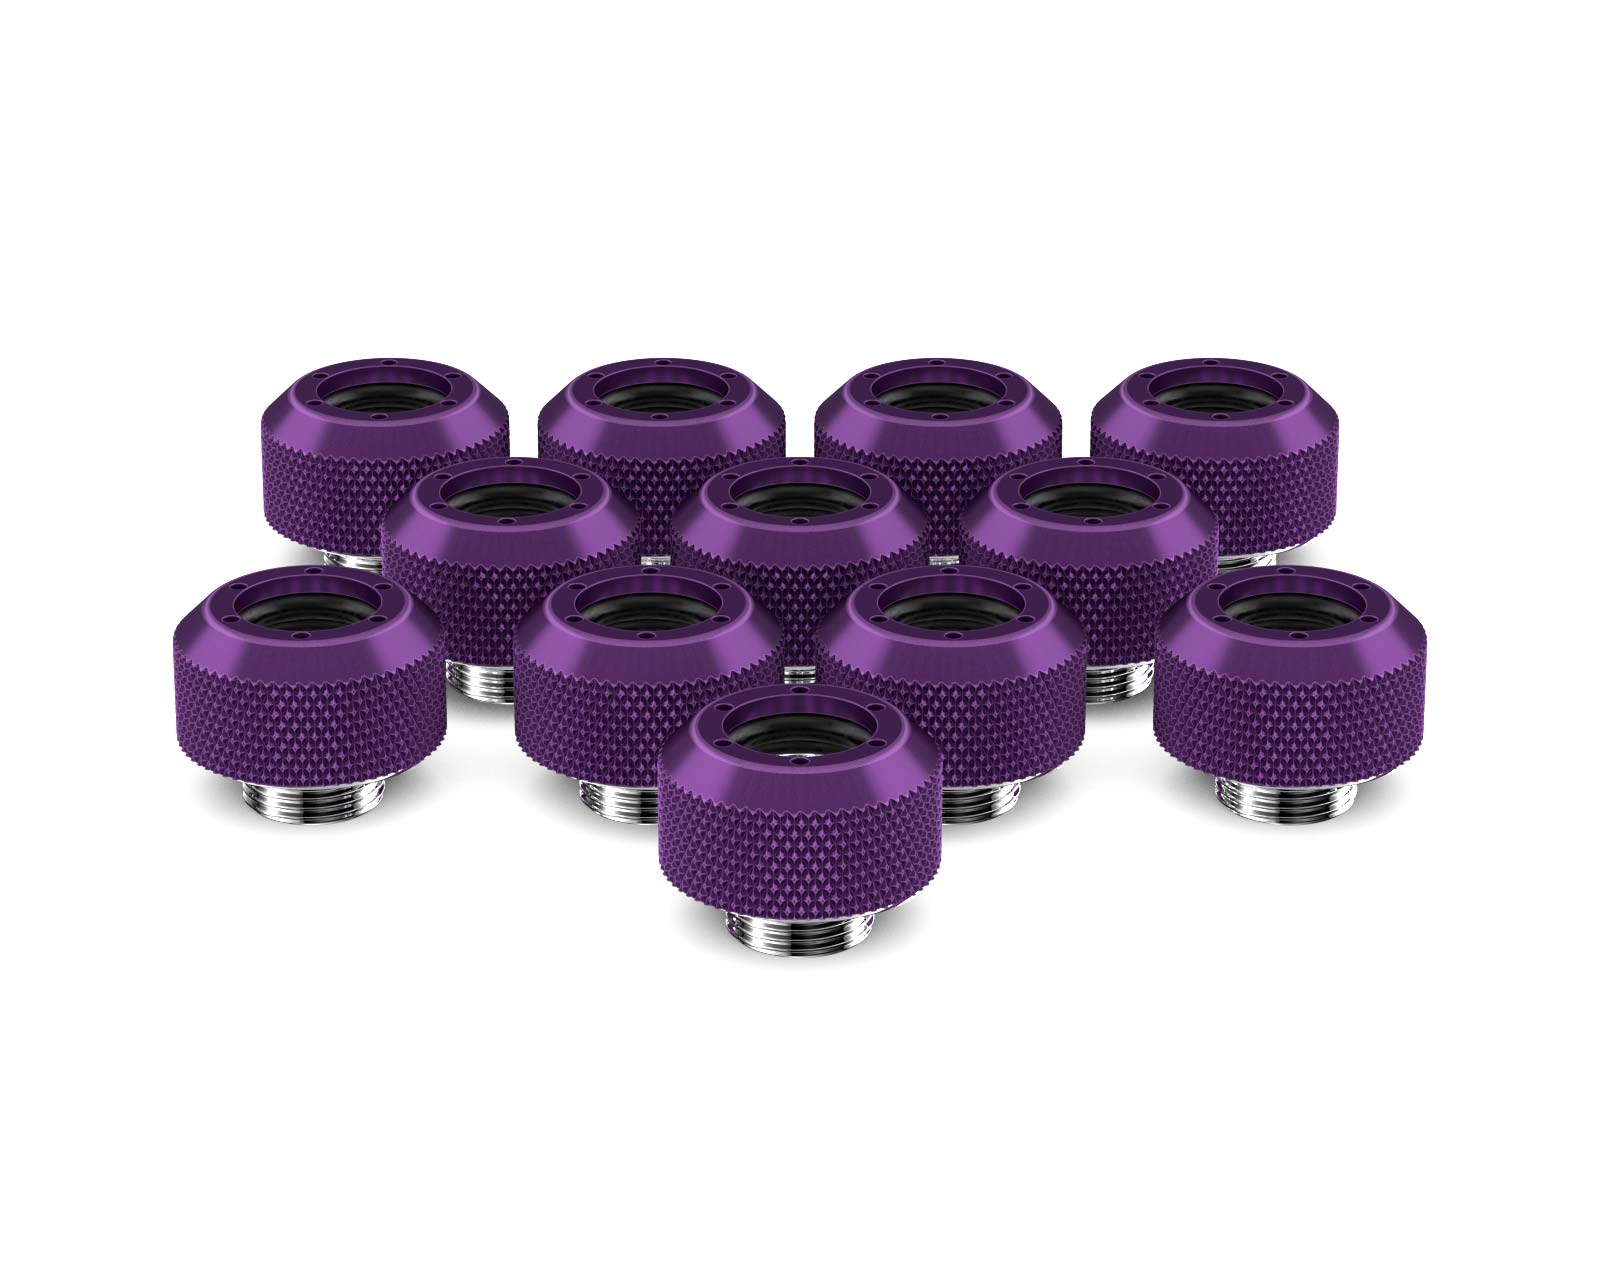 PrimoChill 1/2in. Rigid RevolverSX Series Fitting - 12 pack - PrimoChill - KEEPING IT COOL Candy Purple